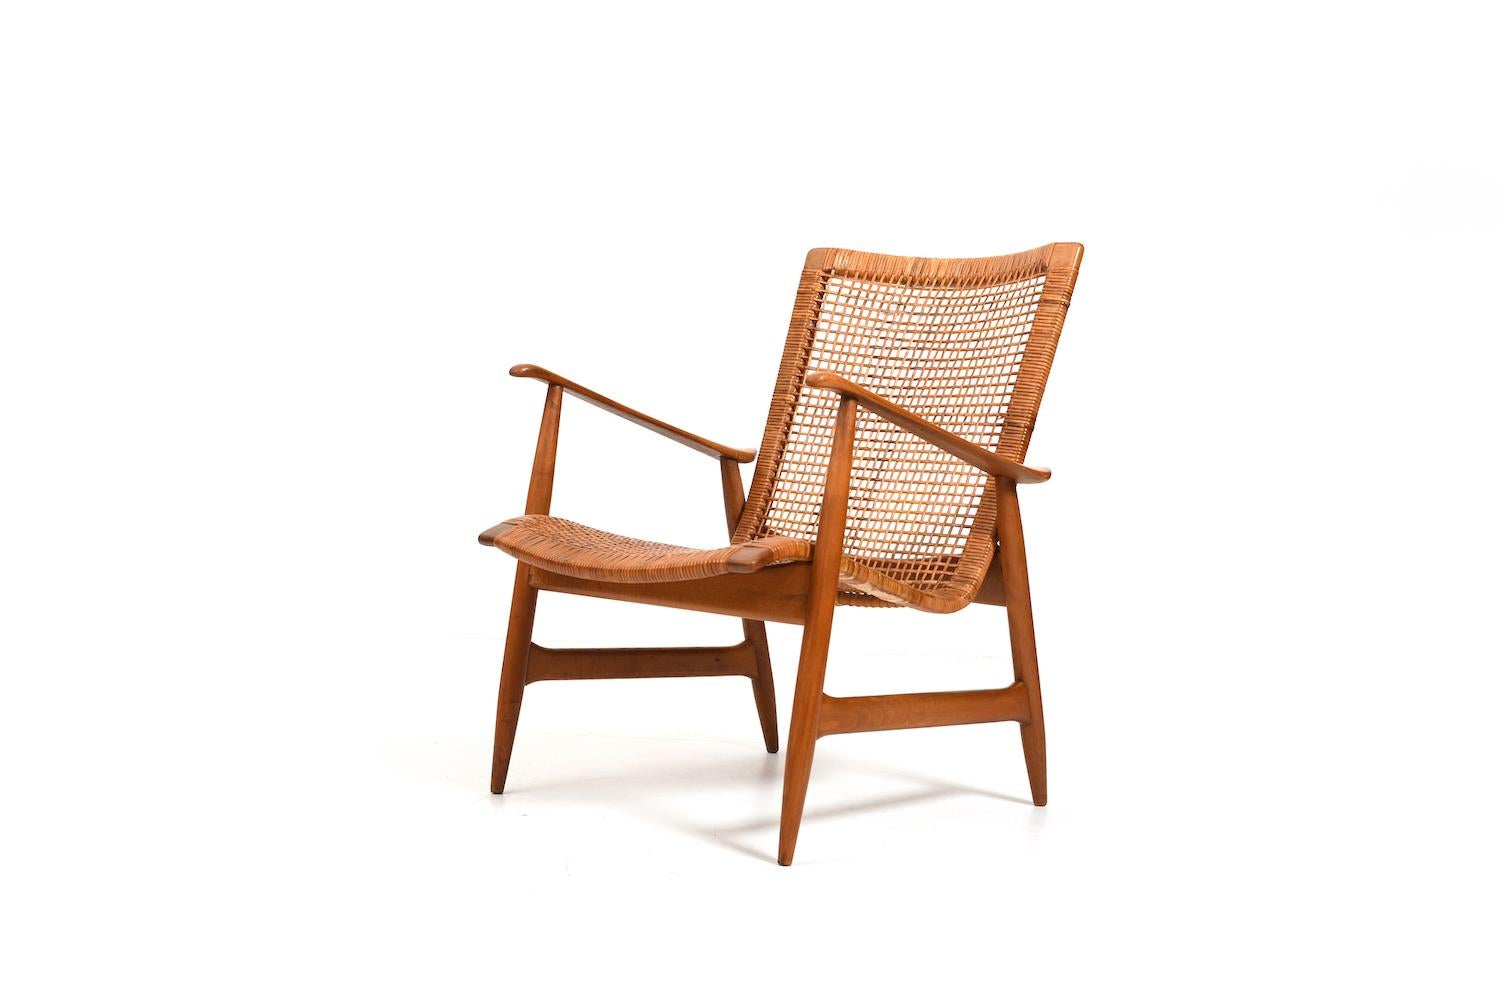 Danish Ib Kofod-Larsen attr. Easychair with Cane early 1950s. For Sale